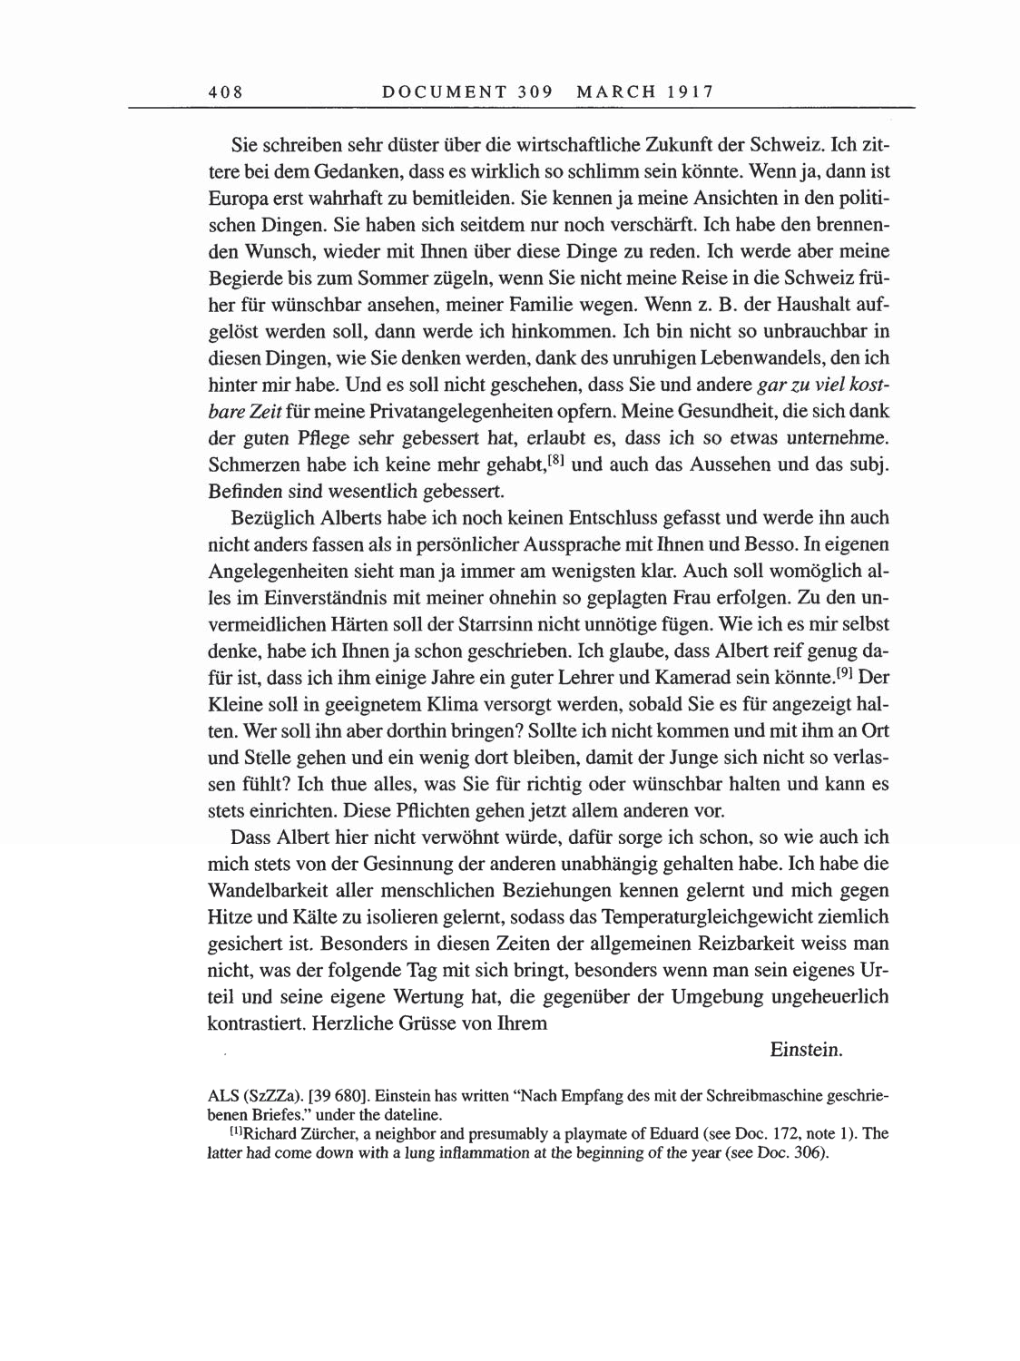 Volume 8, Part A: The Berlin Years: Correspondence 1914-1917 page 408